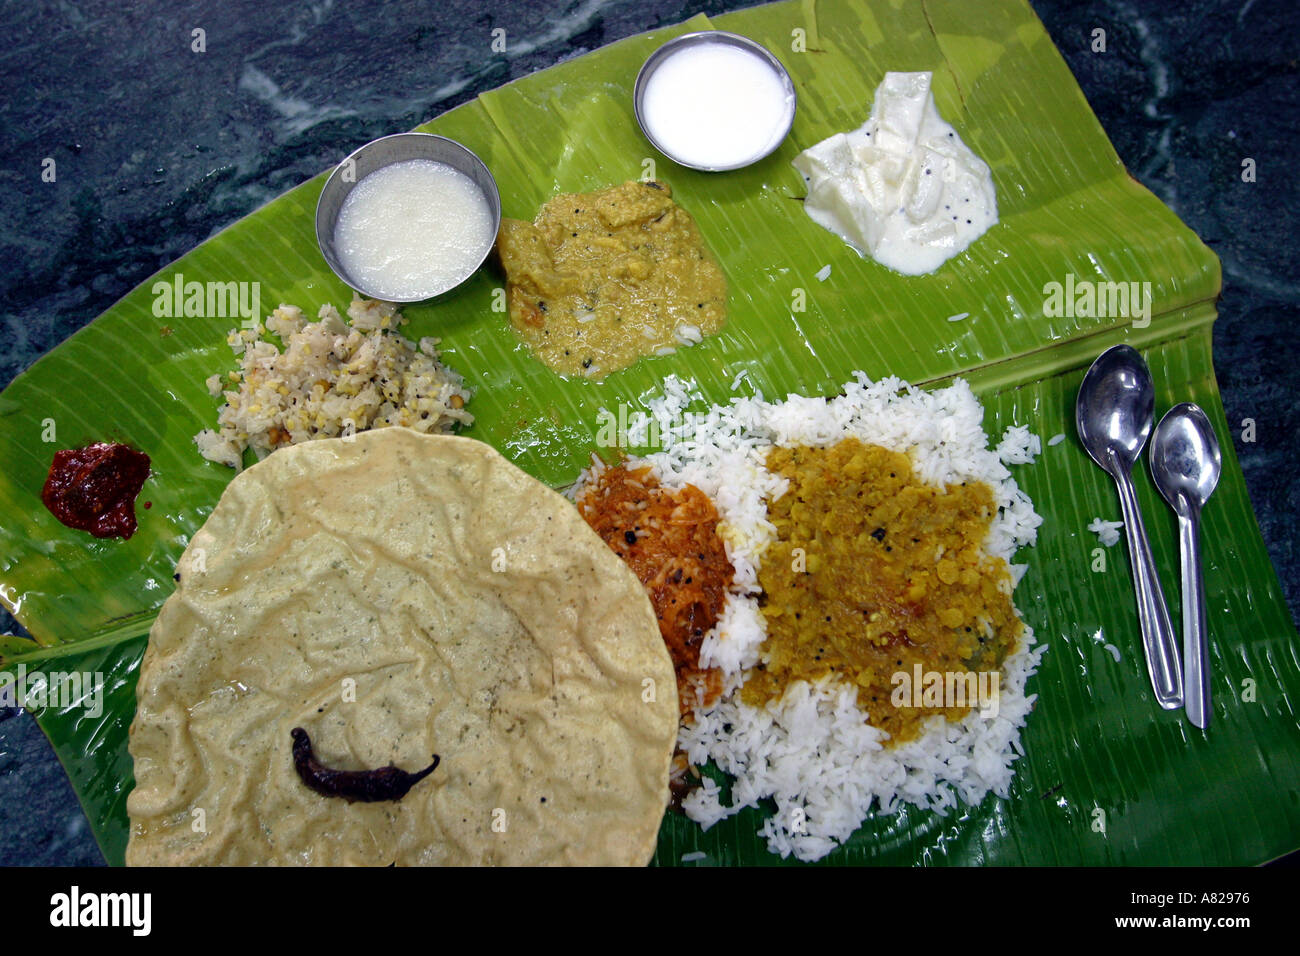 A thali a typical indian meal served on a banana leaf Stock Photo